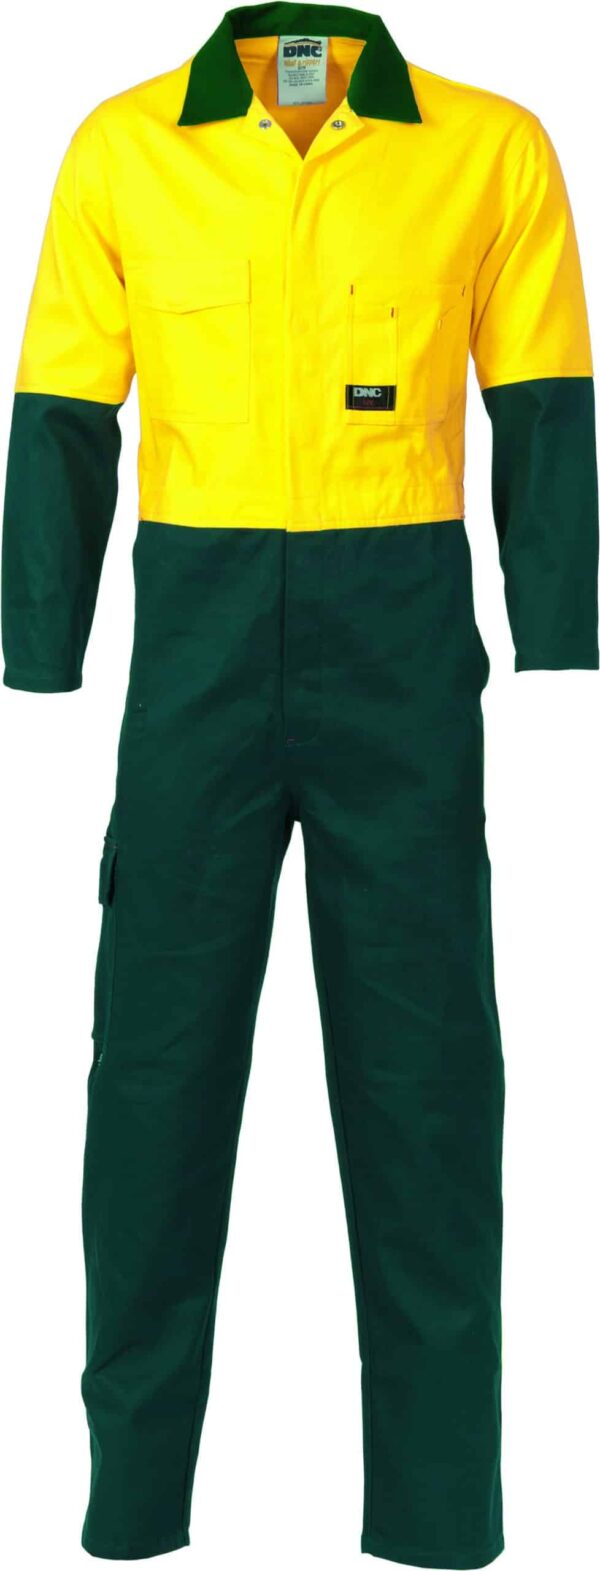 DNC Workwear Hi Vis Two Tone Cotton Coverall